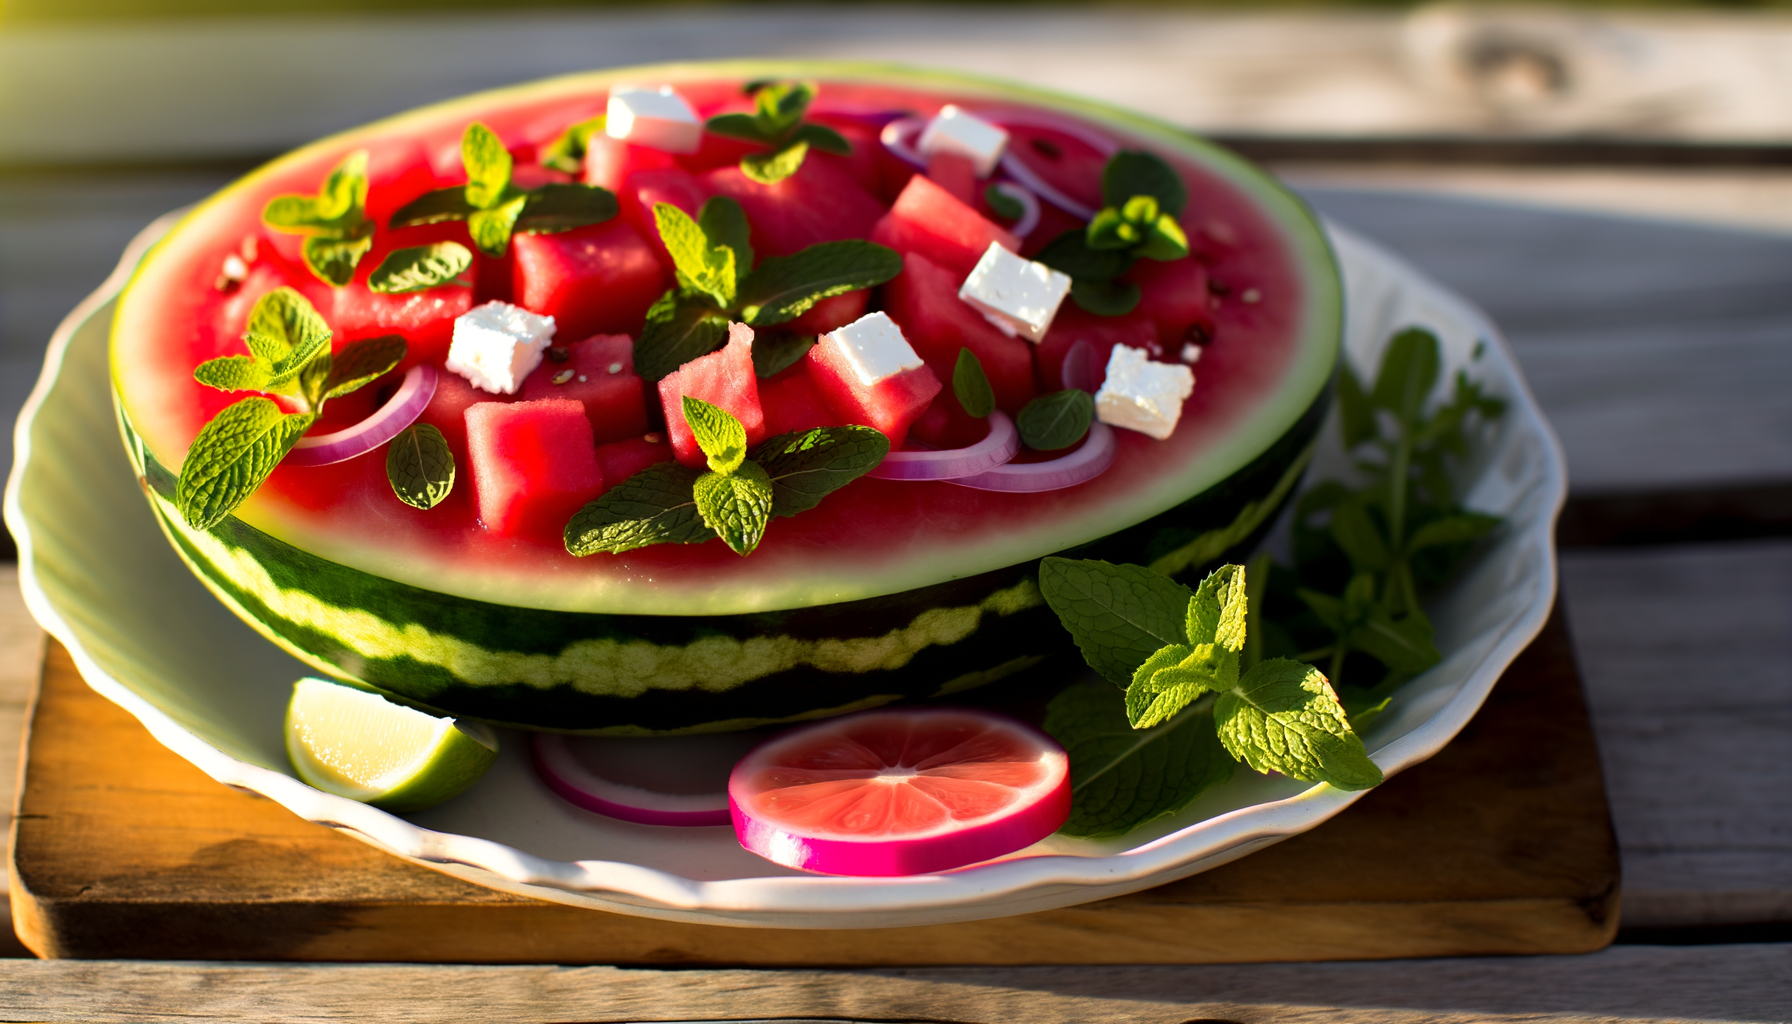 Ripe watermelon cubes with feta and mint on a white platter, backdropped by a rustic wooden table in golden sunlight.